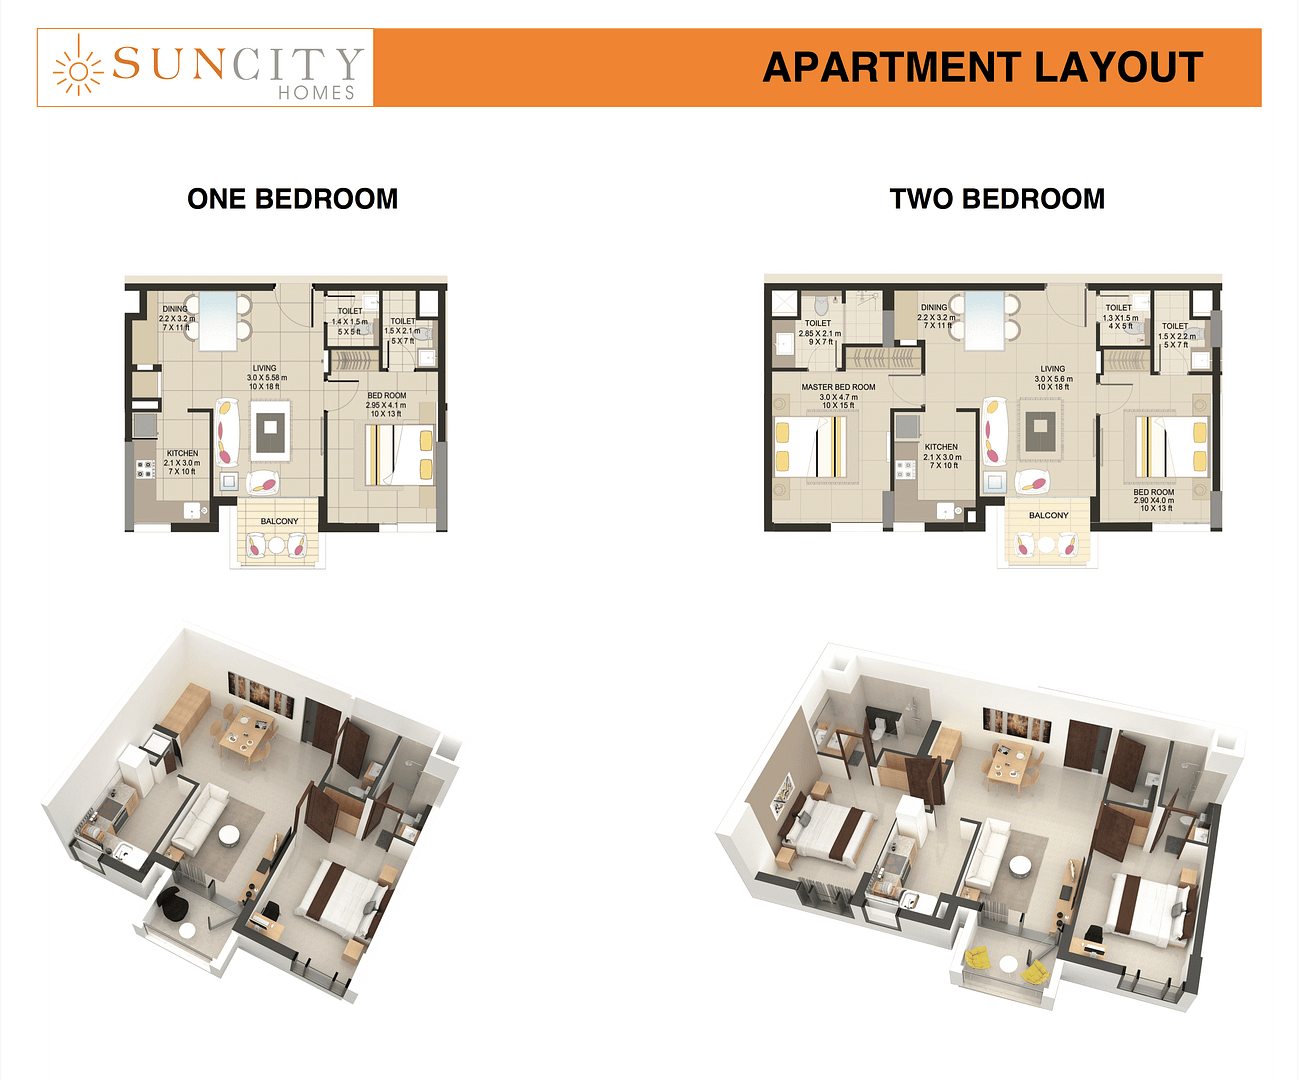 2 Bedroom and 1 Bedroom Apartments for Sale in Dubai, Apartment Layout, 3D Plan For Sun City Homes, One Bedroom, Two Bedroom, For Sale, Dubai International City